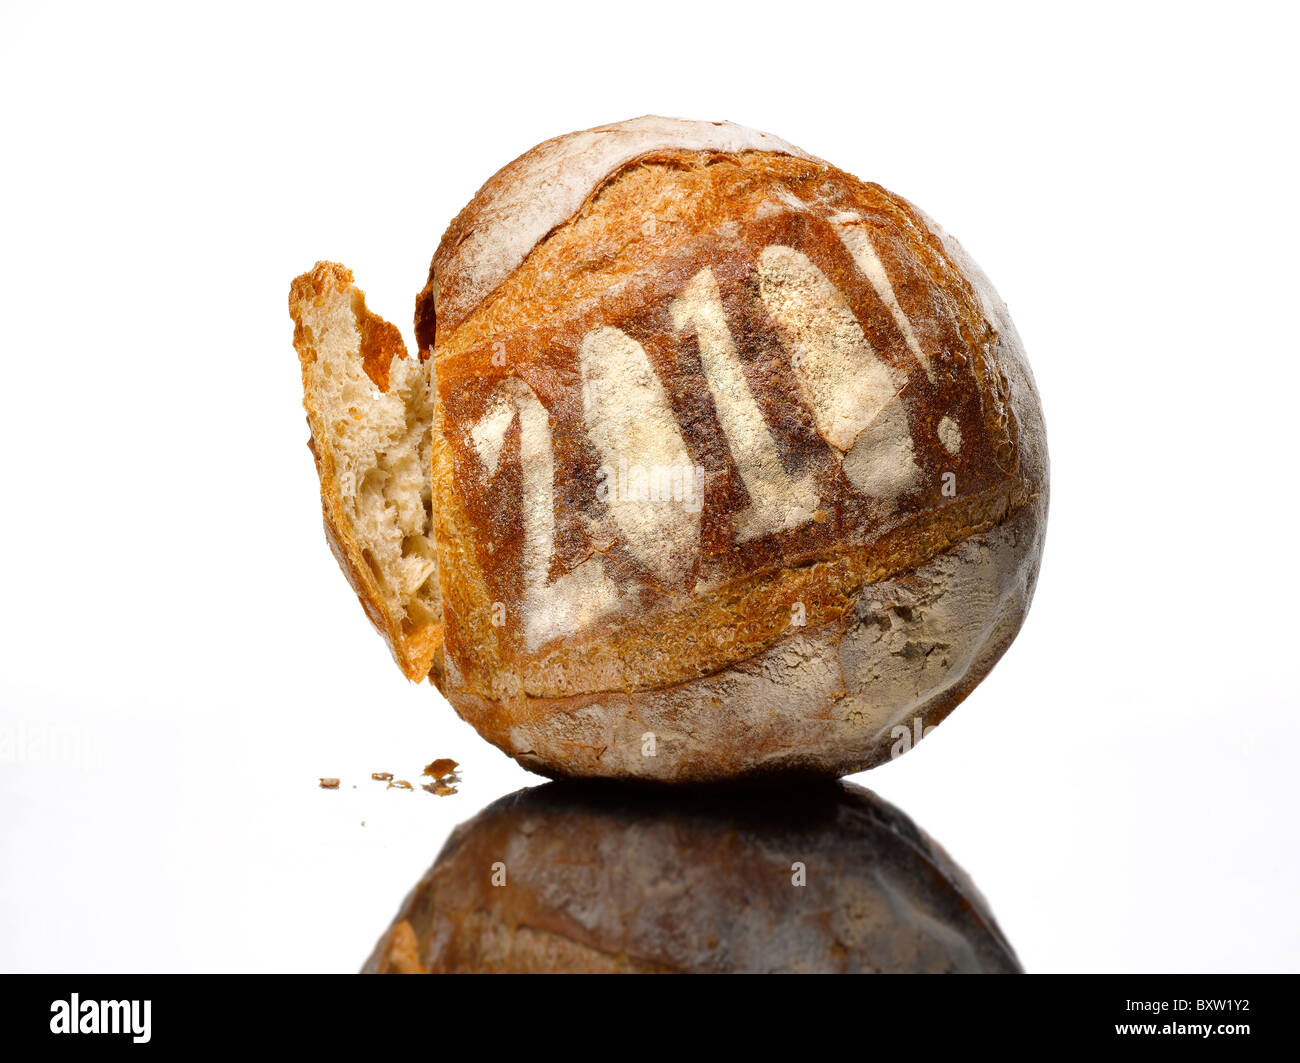 round loaf of bread dusted with the year 2010 Stock Photo